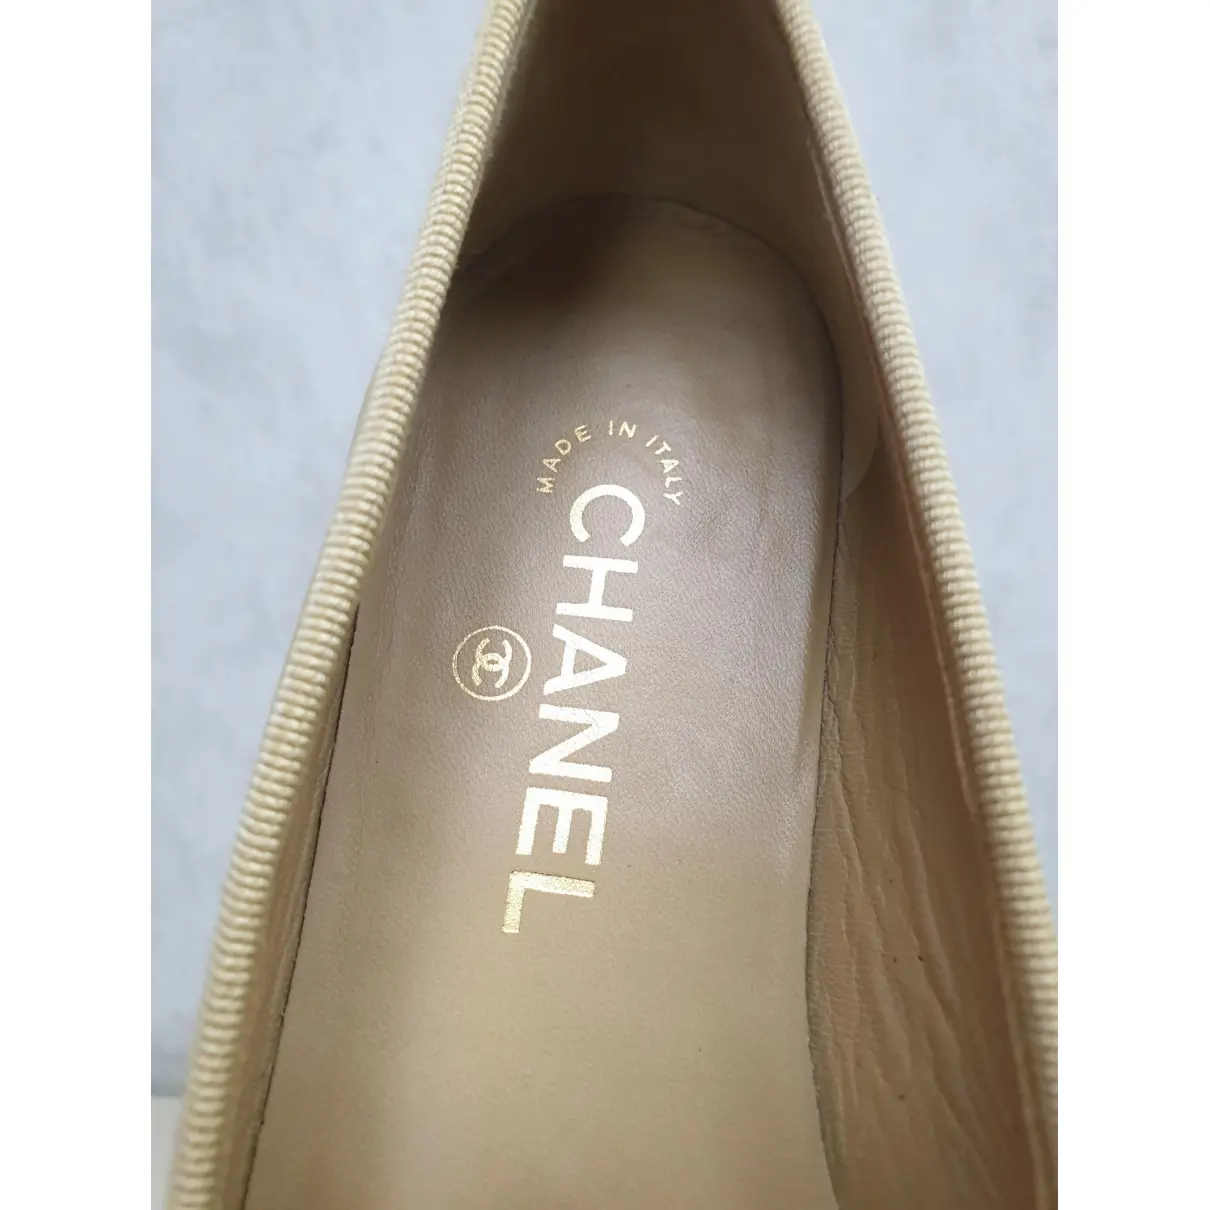 Patent leather ballet flats Chanel